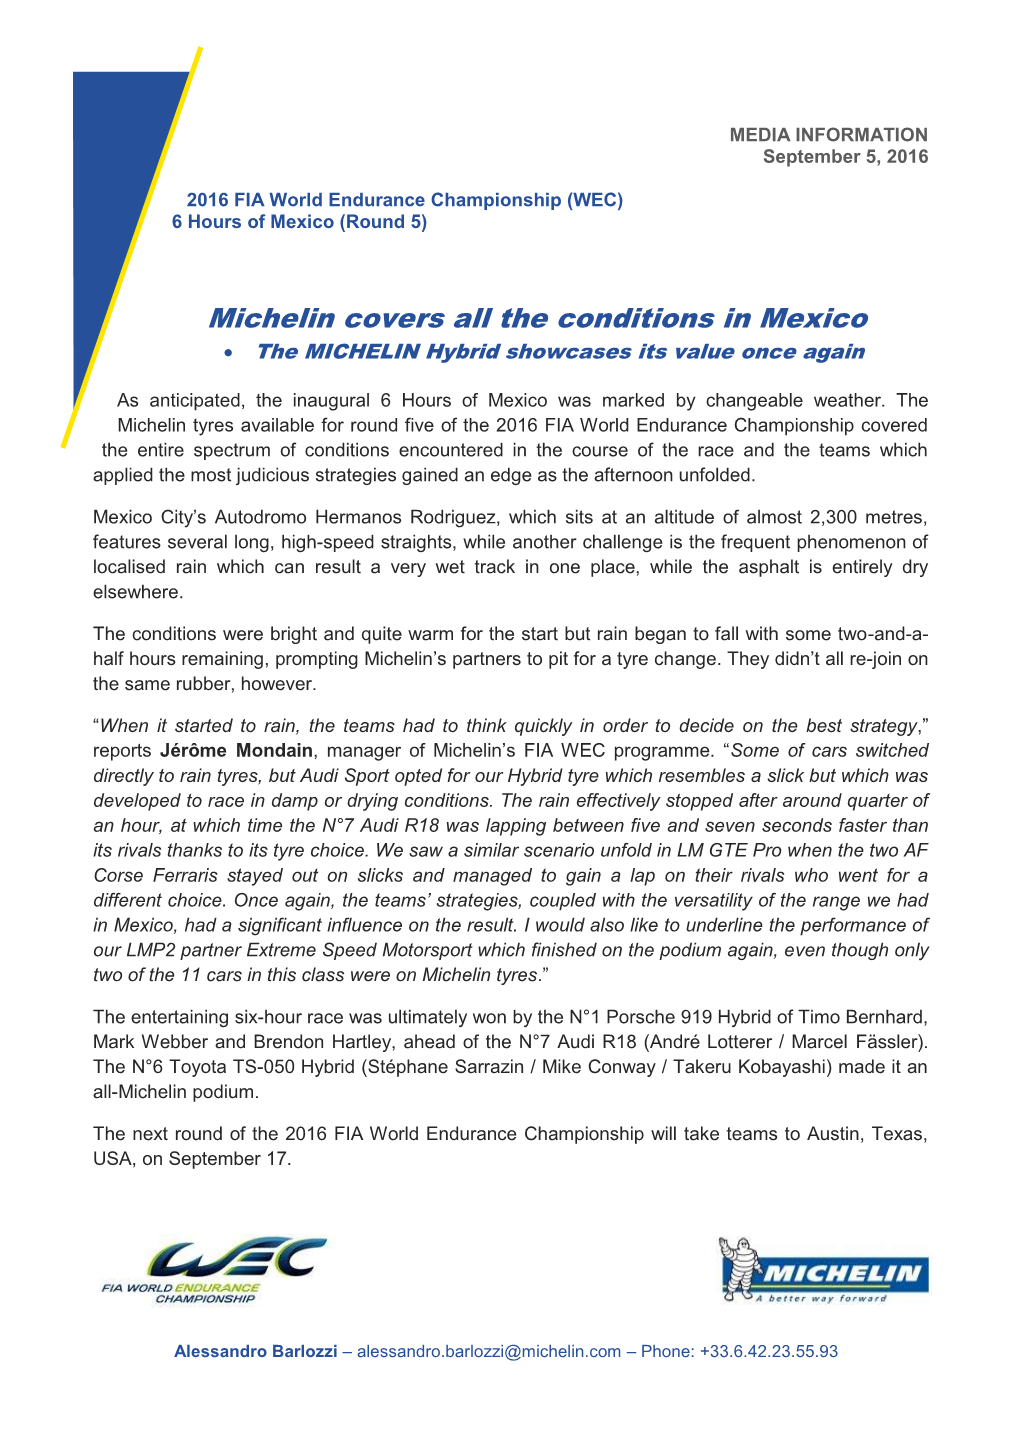 Michelin Covers All the Conditions in Mexico  the MICHELIN Hybrid Showcases Its Value Once Again